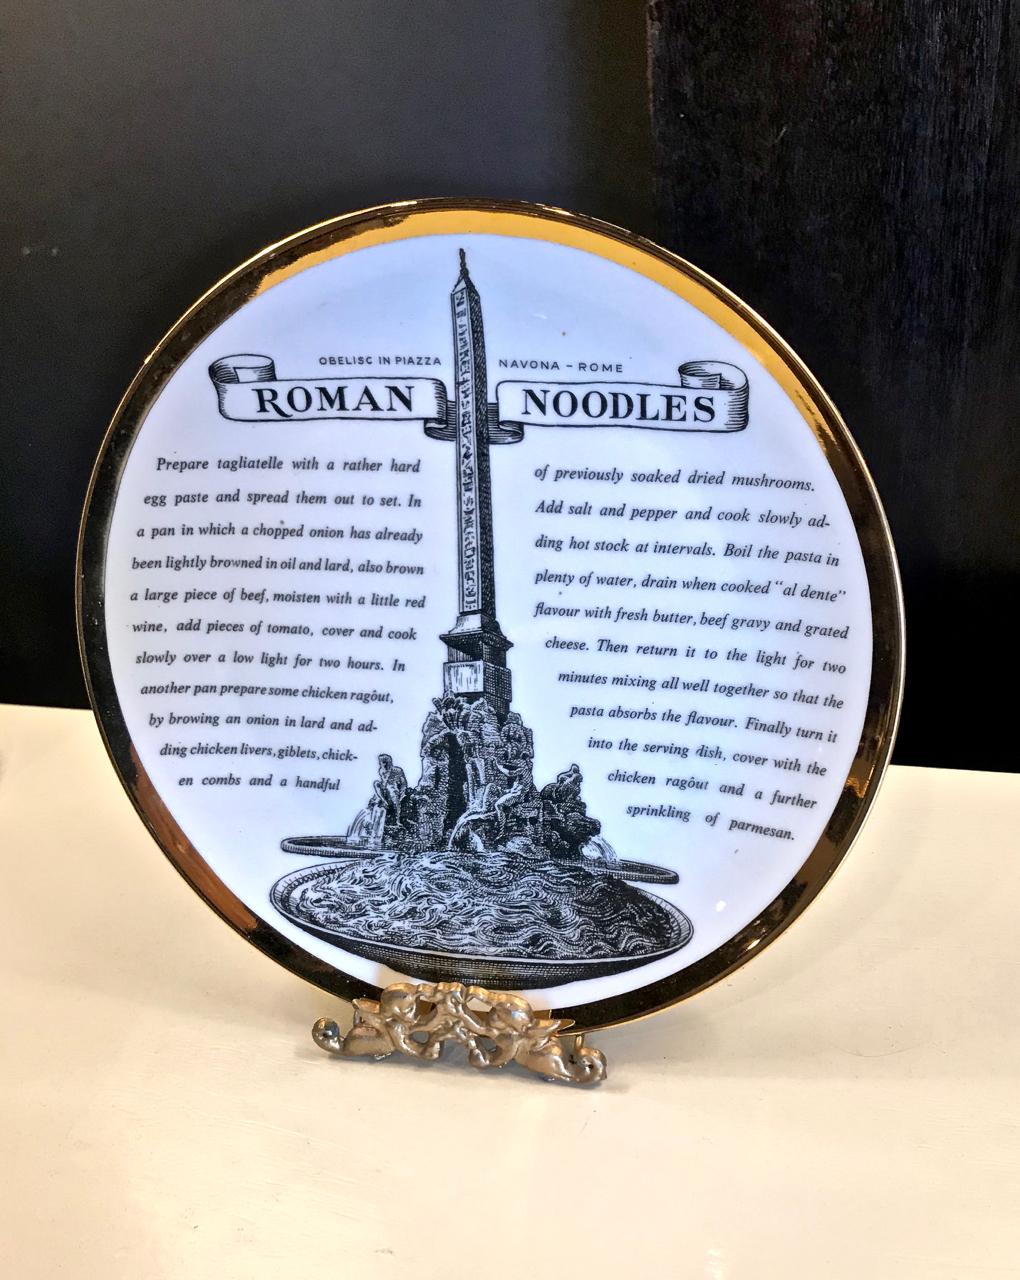 This is a superb set of eight Fornasetti Recipe plates (English Version). The plates depict various Italian cities and monuments and each carries a recipe for a culinary regional favorite. The plates are rimmed with a gold band.